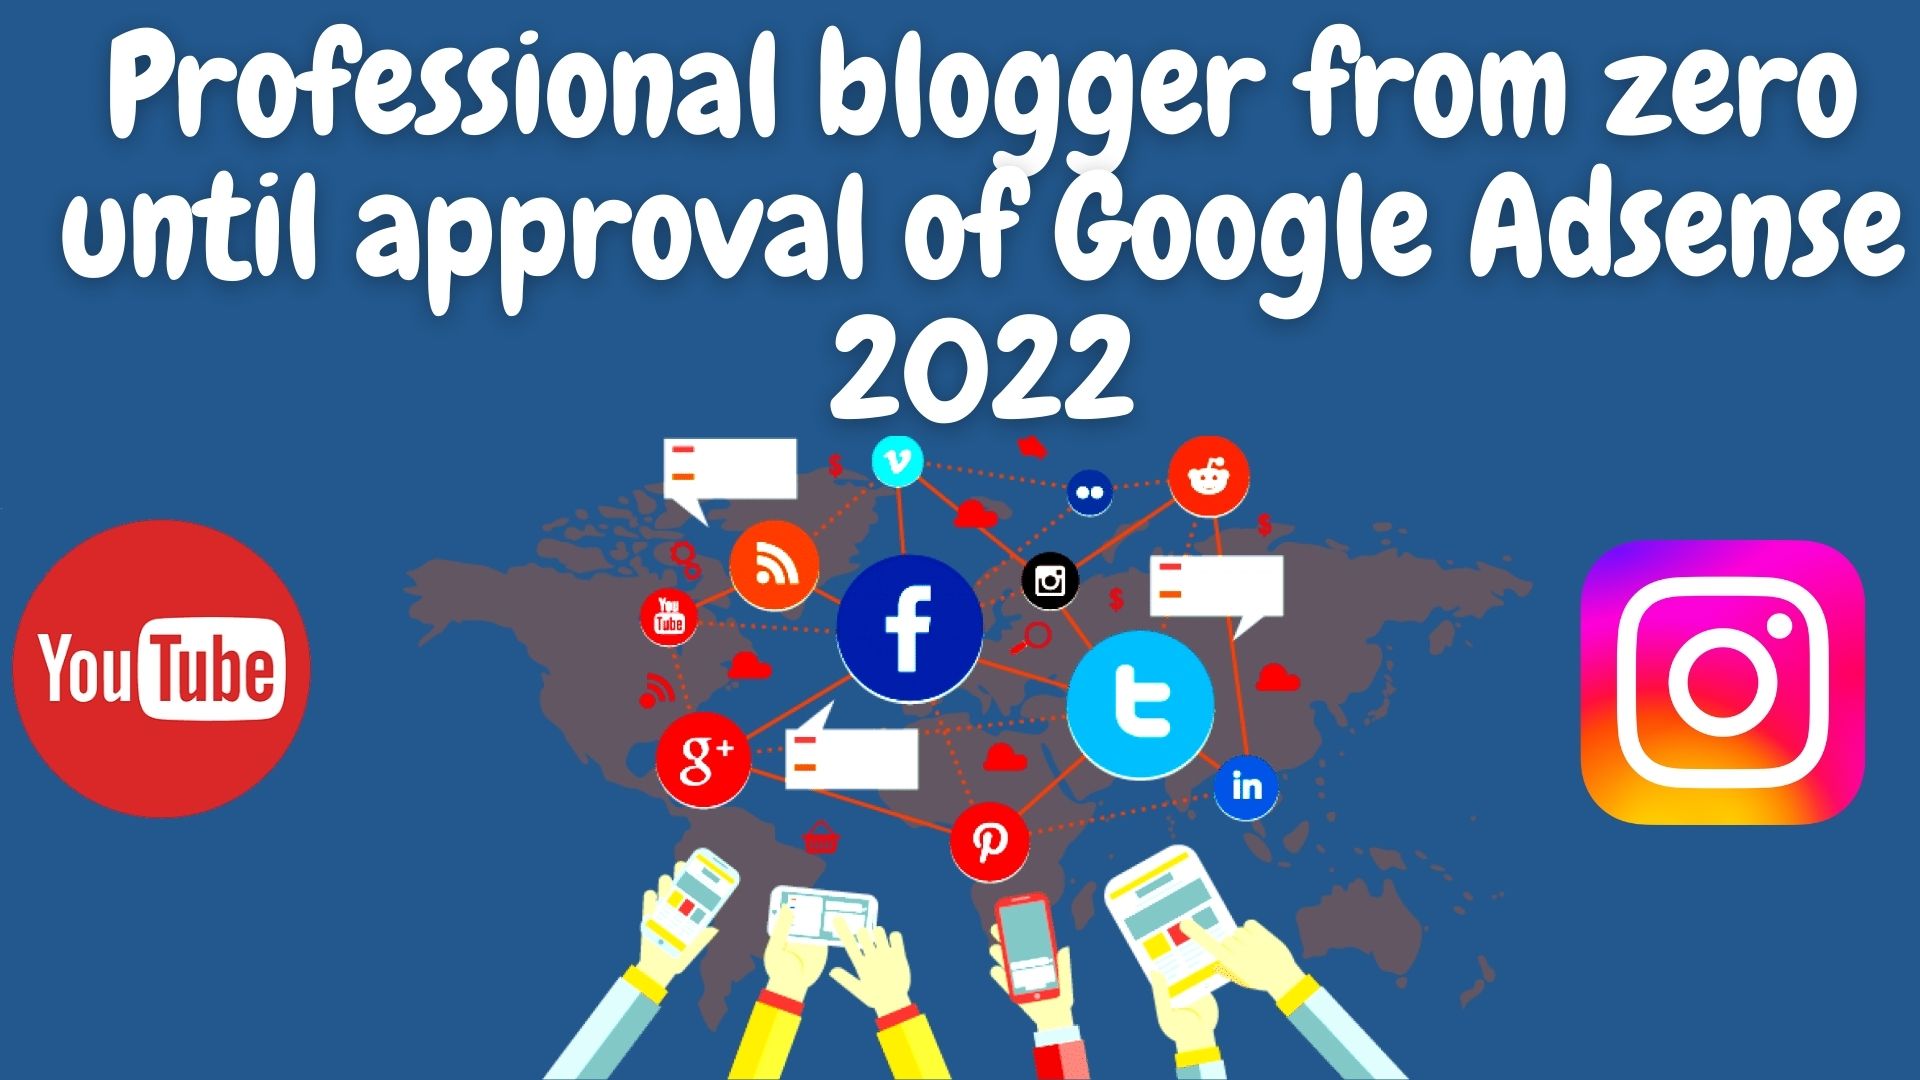 Professional blogger from zero until approval of google adsense 2022